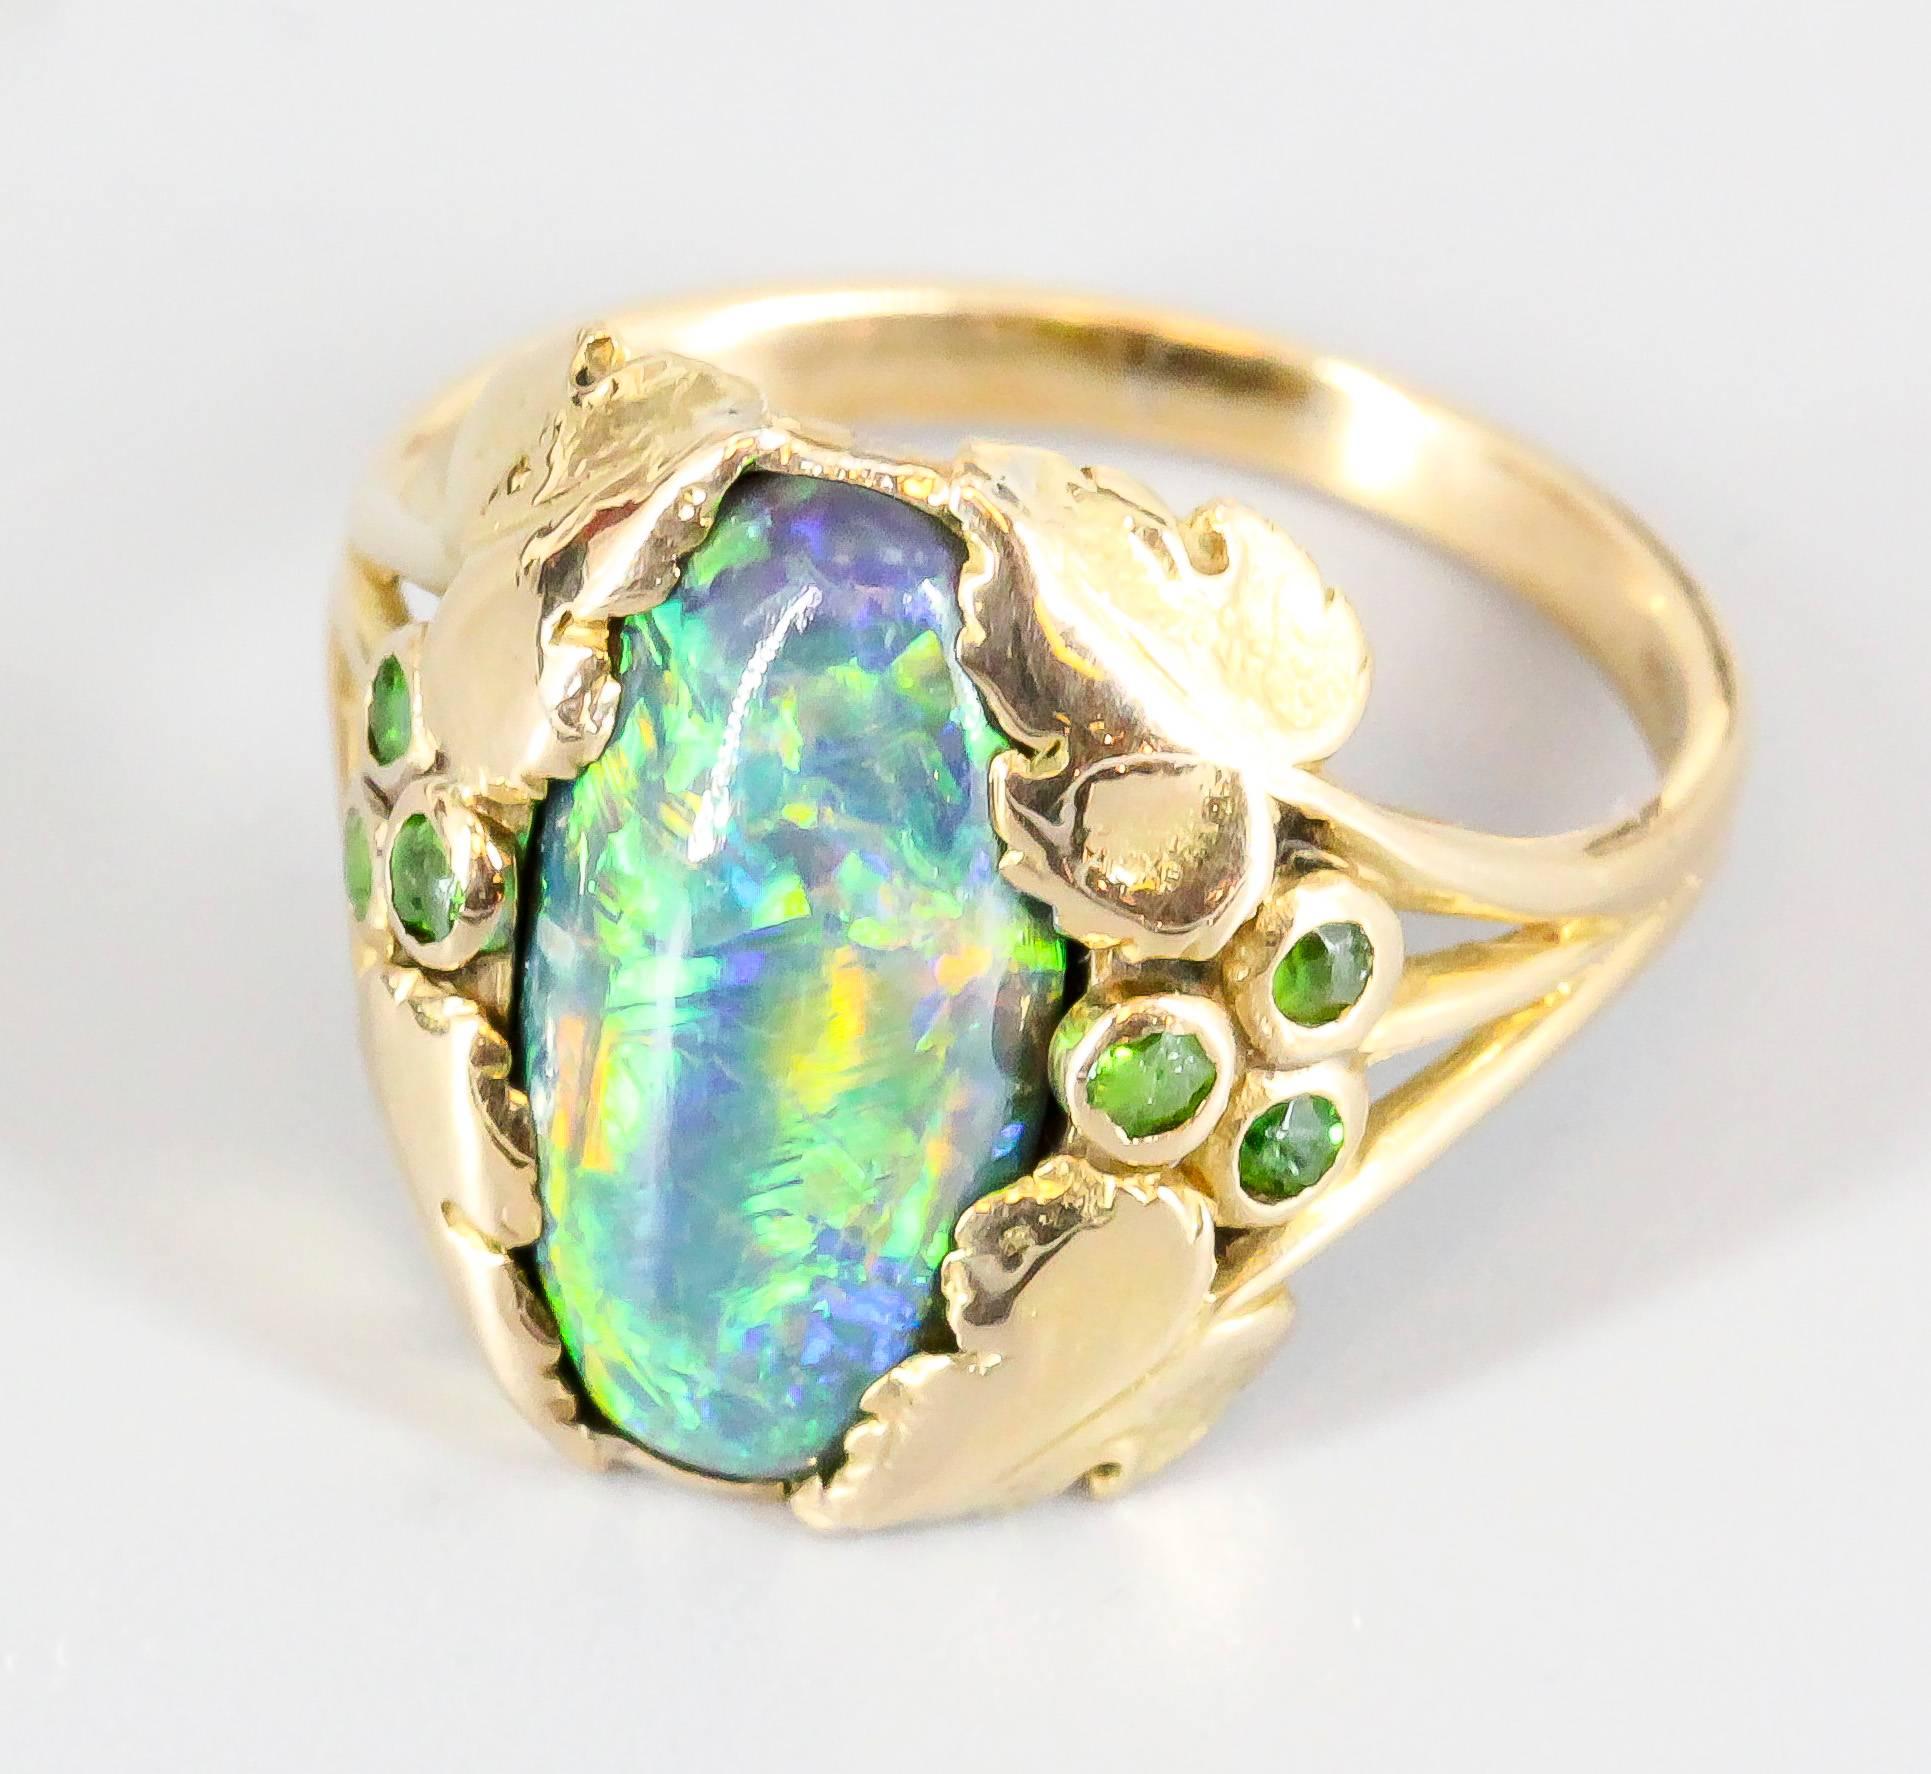 Refined Australian black opal, emerald and 18K yellow gold ring by Louis Comfort Tiffany for Tiffany & Co, circa 1905. It features an oval Australian black opal at the center, with rich green tsavorite garnets at each side, within a gold